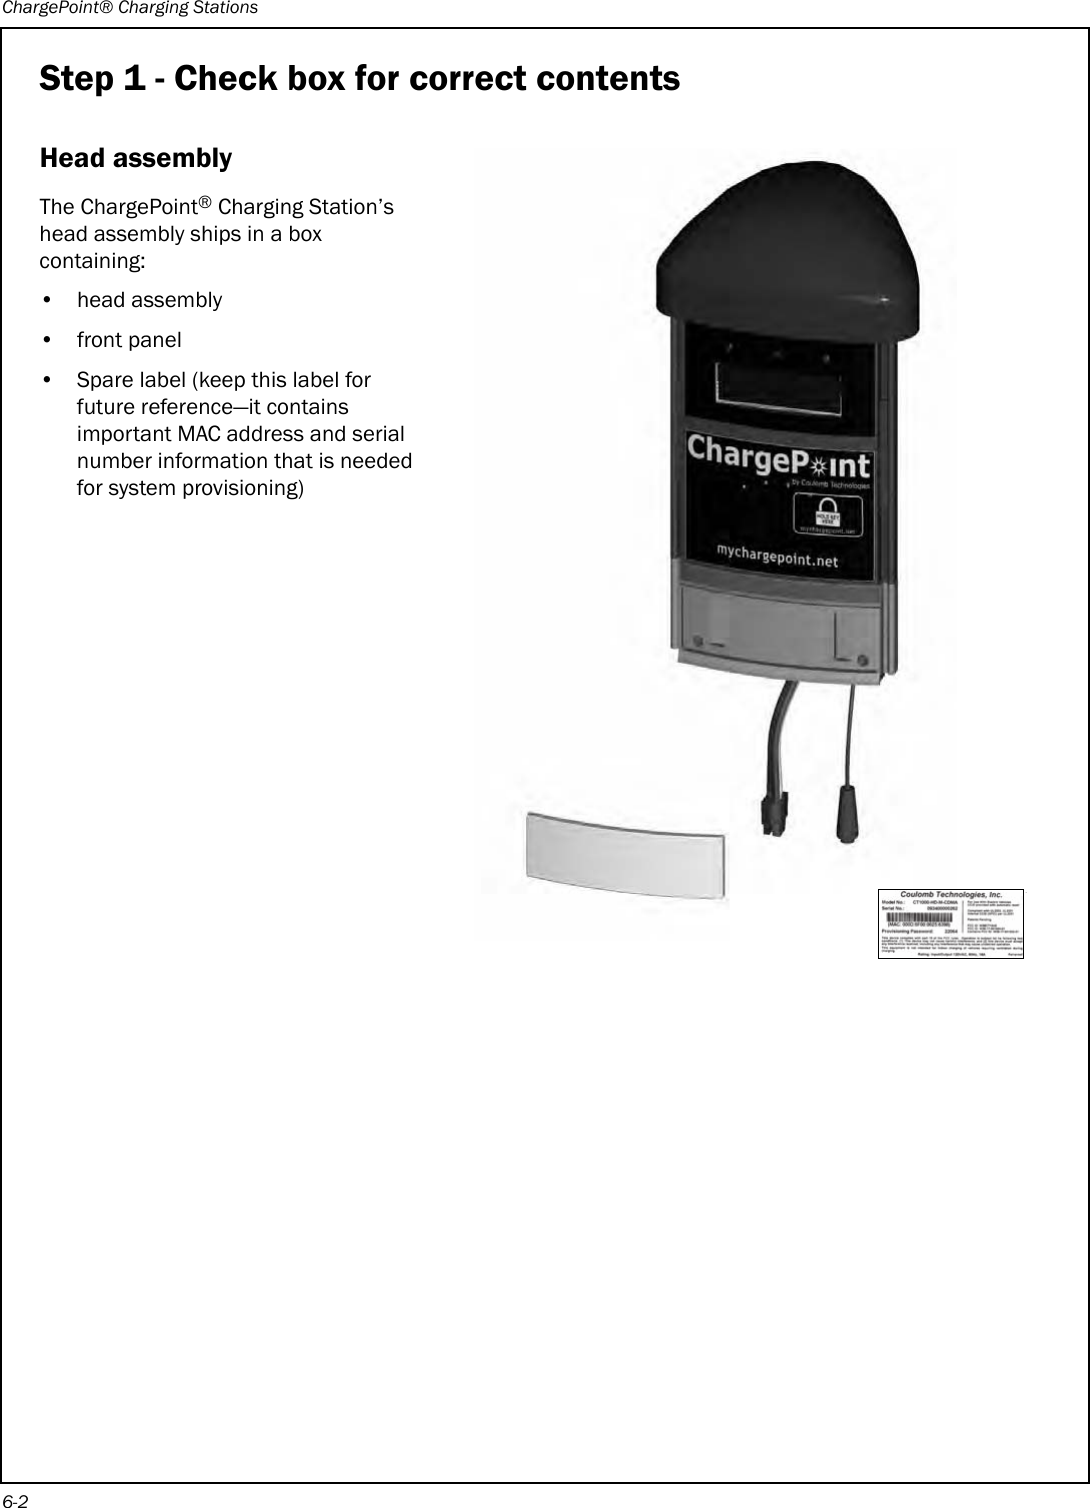 ChargePoint® Charging Stations6-2Step 1 - Check box for correct contentsHead assemblyThe ChargePoint® Charging Station’s head assembly ships in a box containing:• head assembly• front panel• Spare label (keep this label for future reference—it contains important MAC address and serial number information that is needed for system provisioning) 